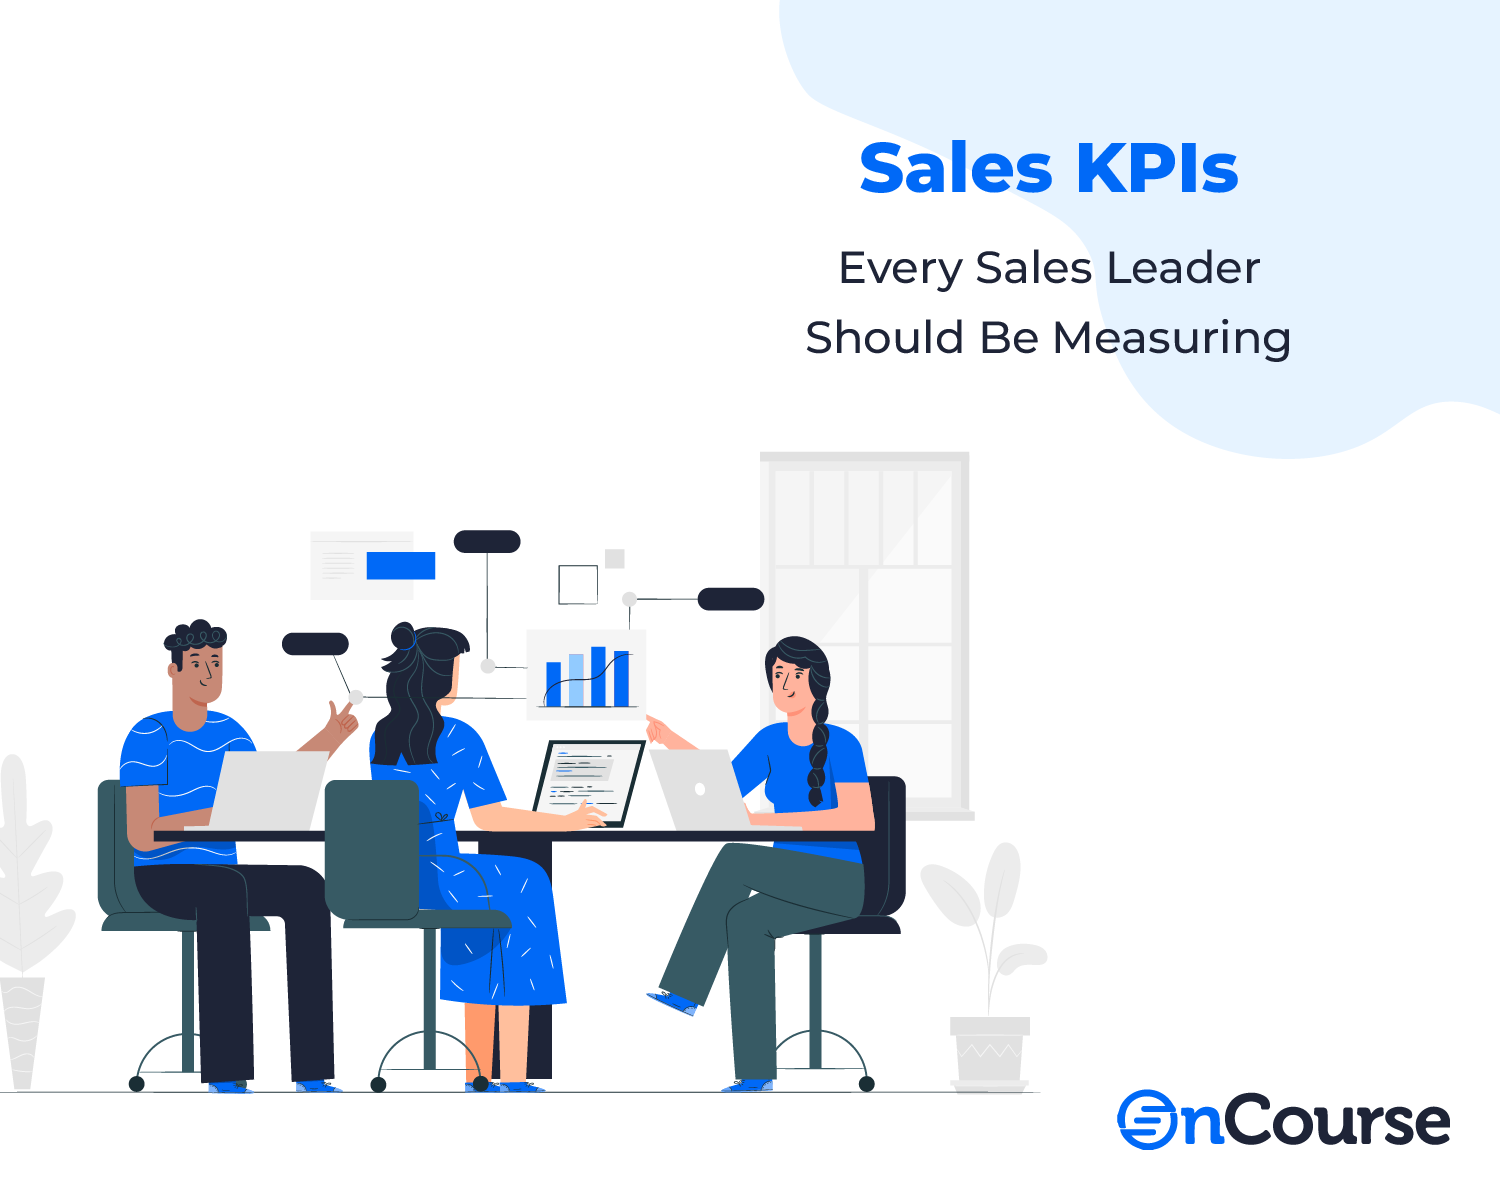 The Sales KPIs Every Sales Leader Should Be Measuring